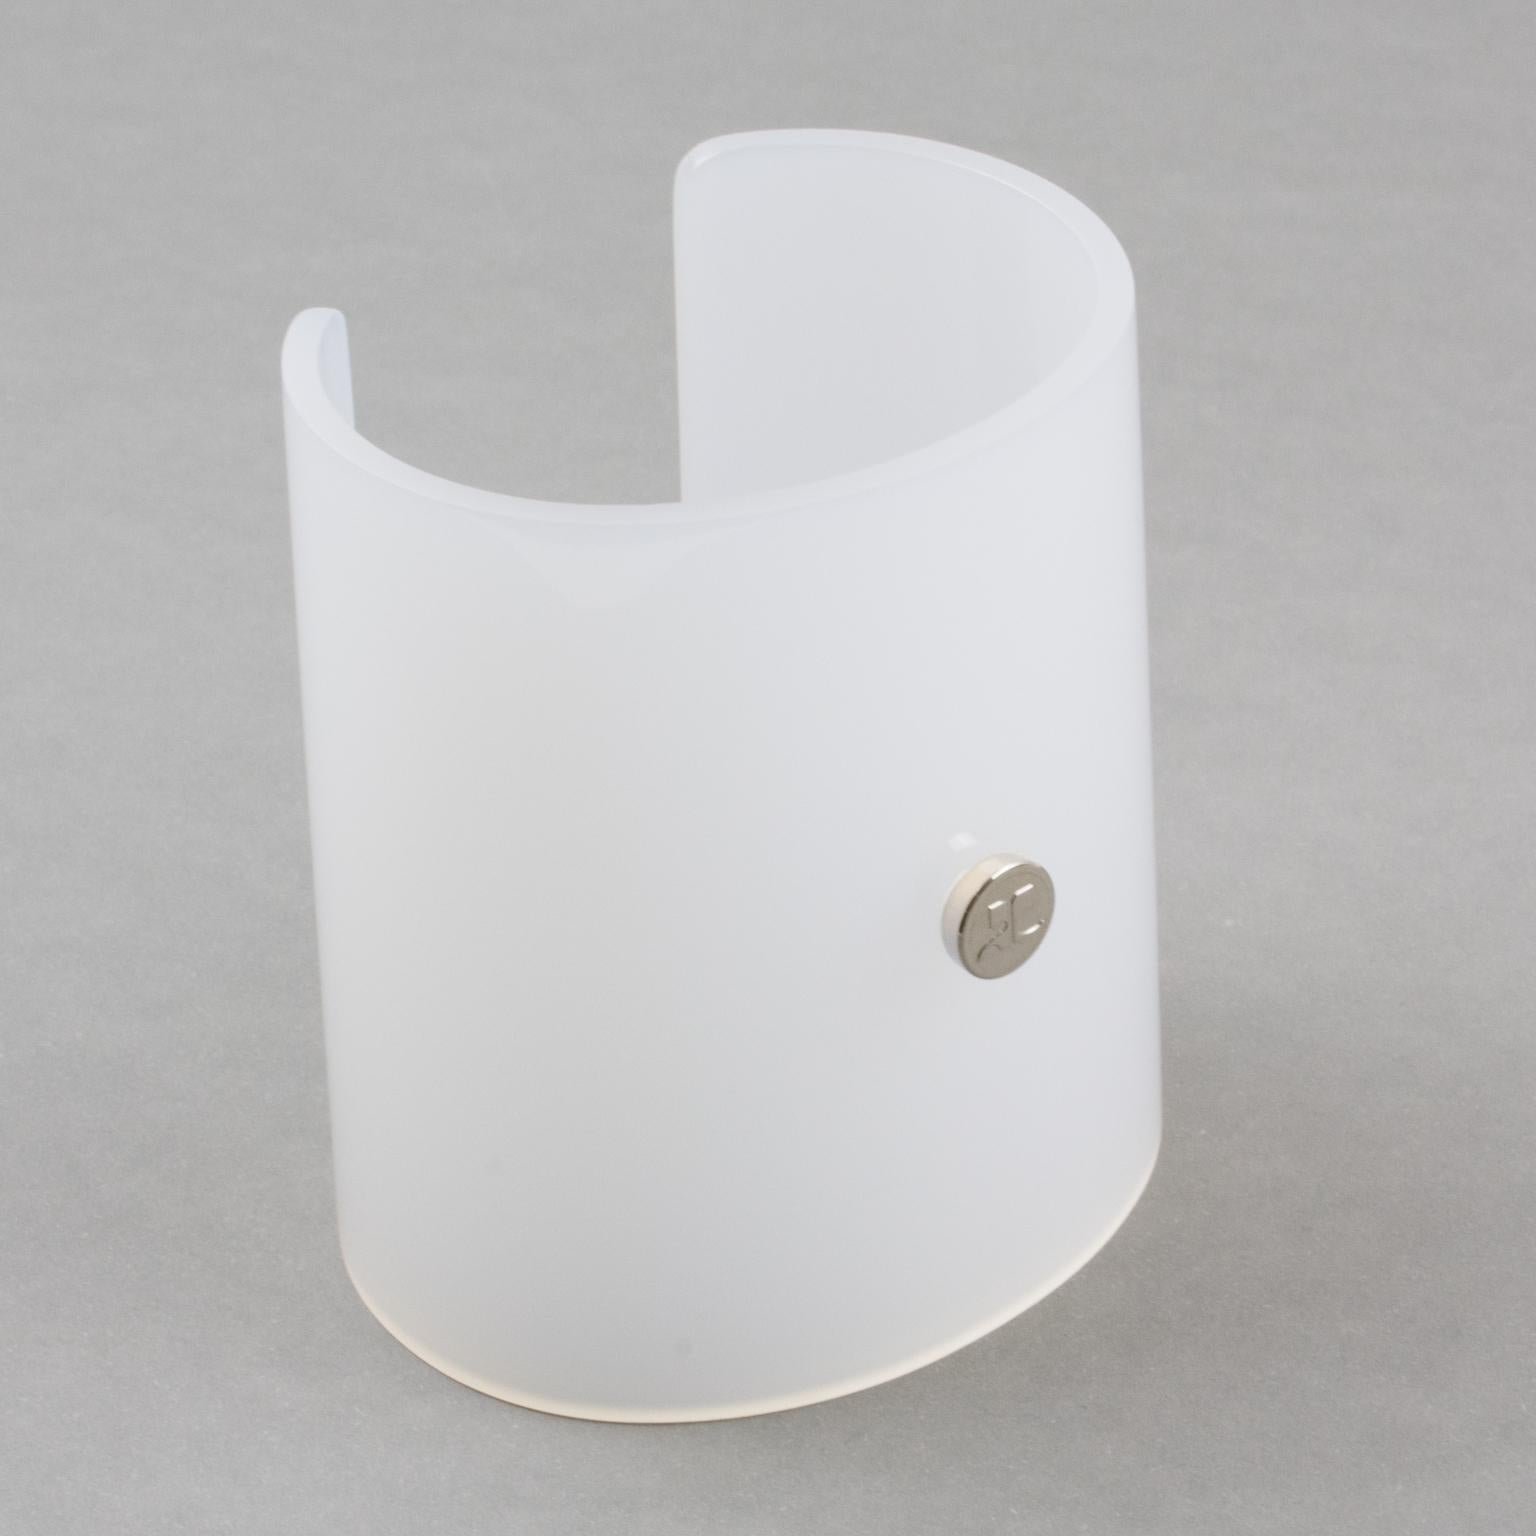 Courreges Paris designed this handsome cuff bracelet. The oversized cuff design is made of white opalescent resin or Lucite. The piece has a spectacular cone shape and is signed on the front with a chrome metal 